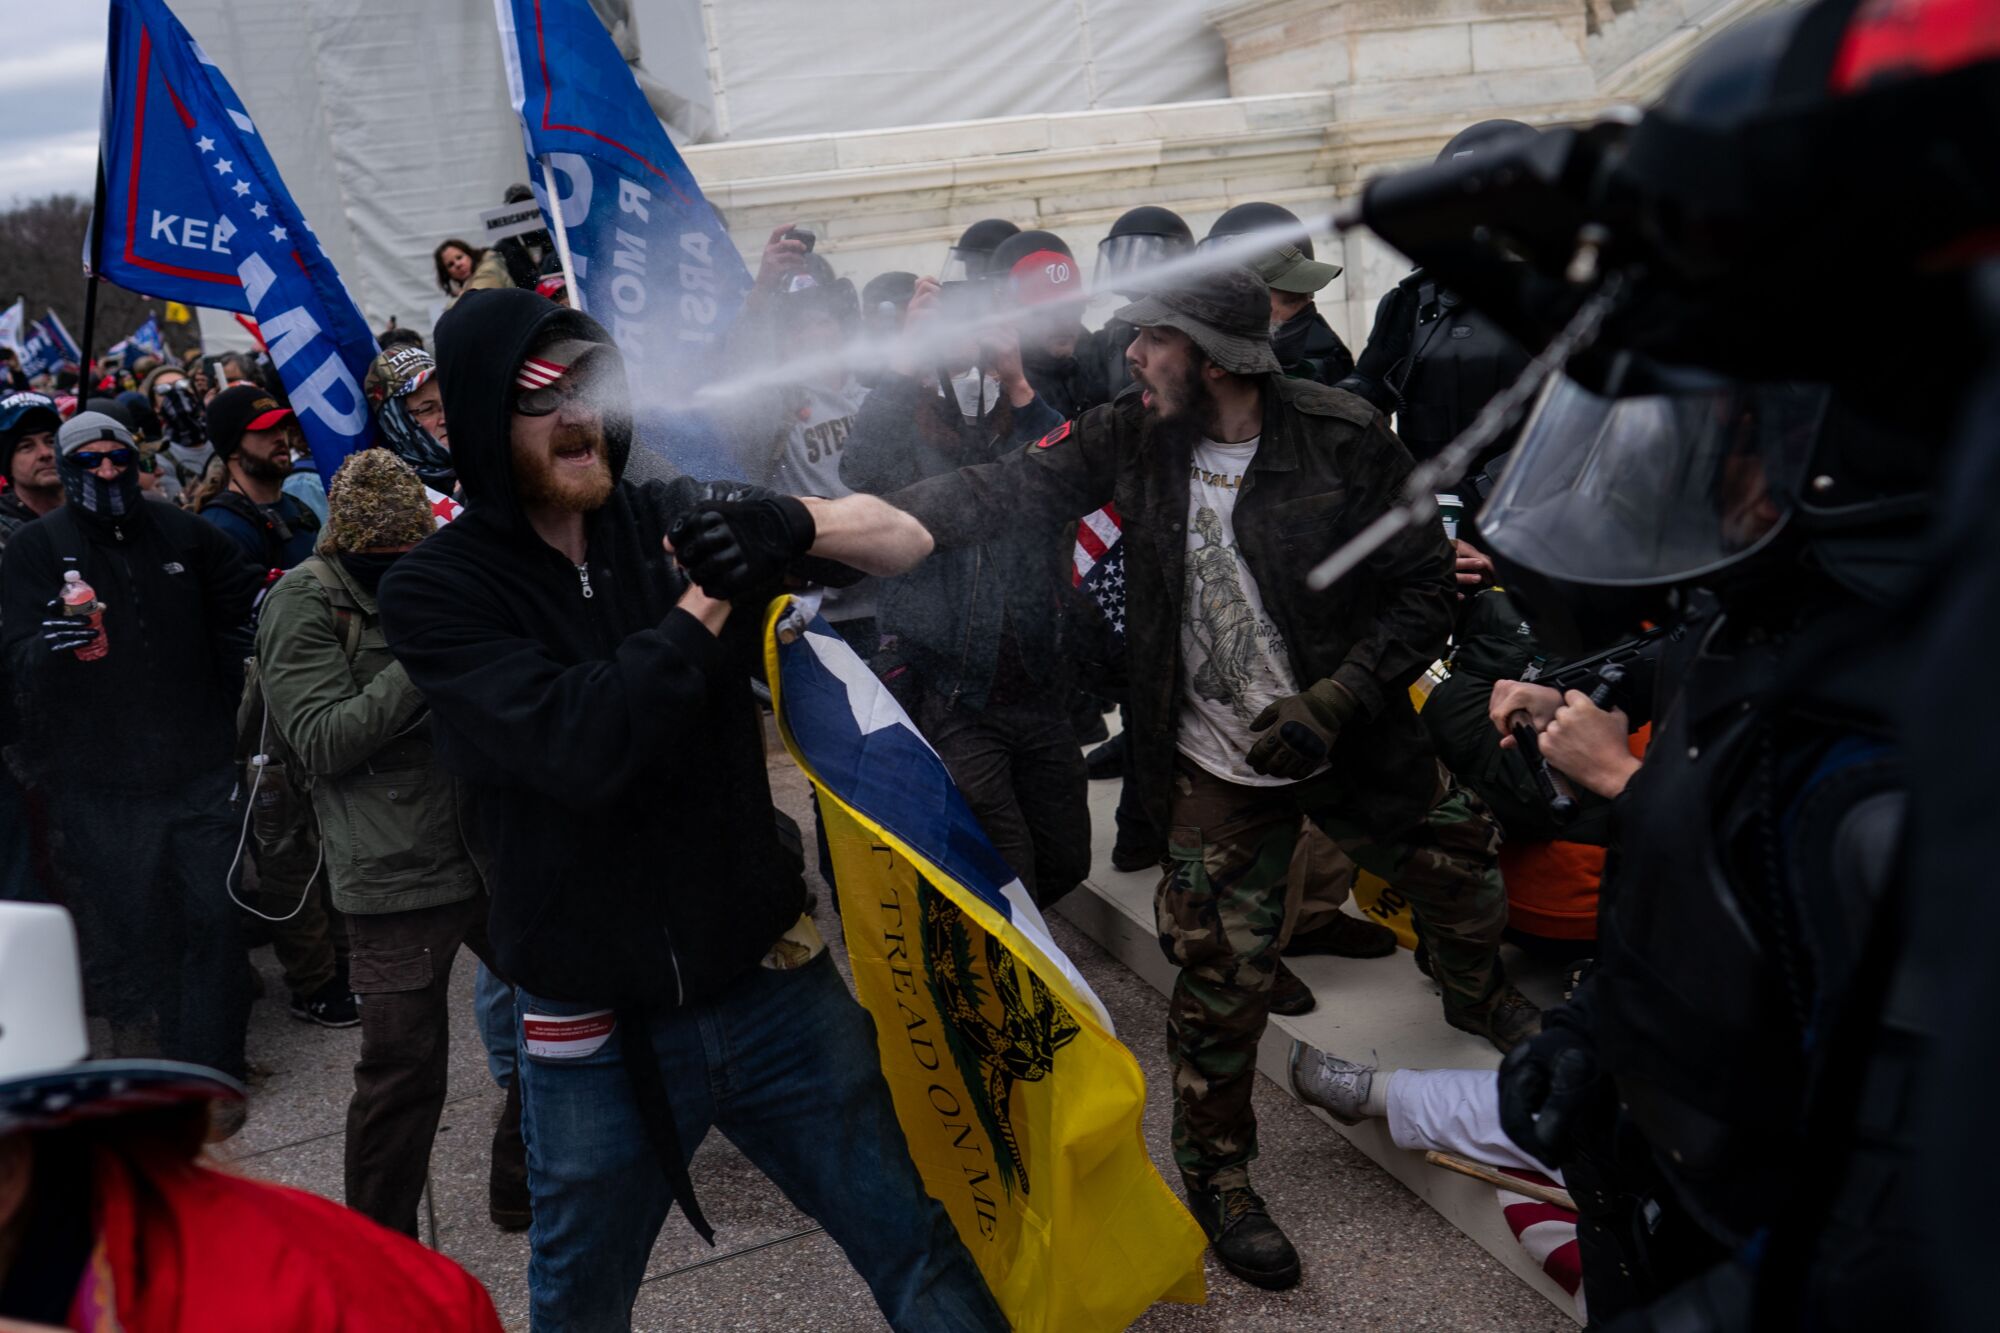 A man is sprayed in the face as protesters clash with police